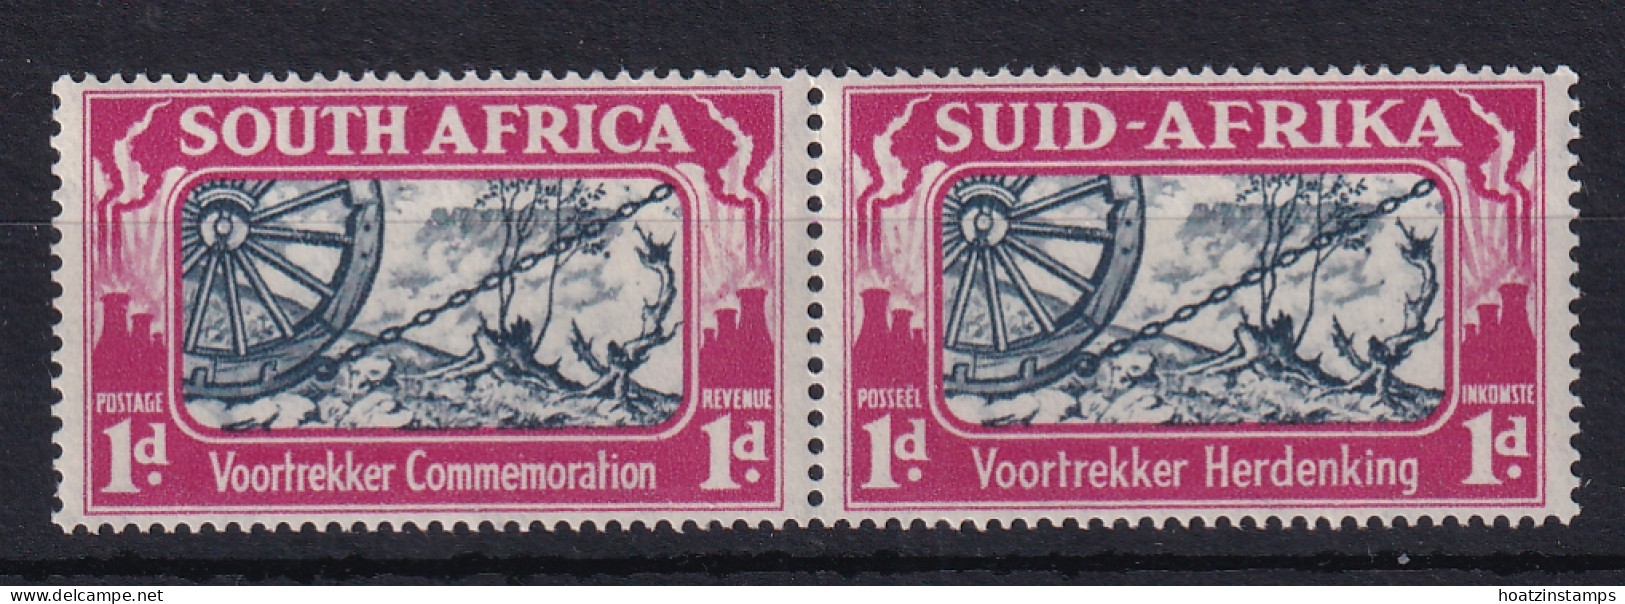 South Africa: 1938   Voortrekker Commemoration  SG80   1d   MH Pair - Nuovi